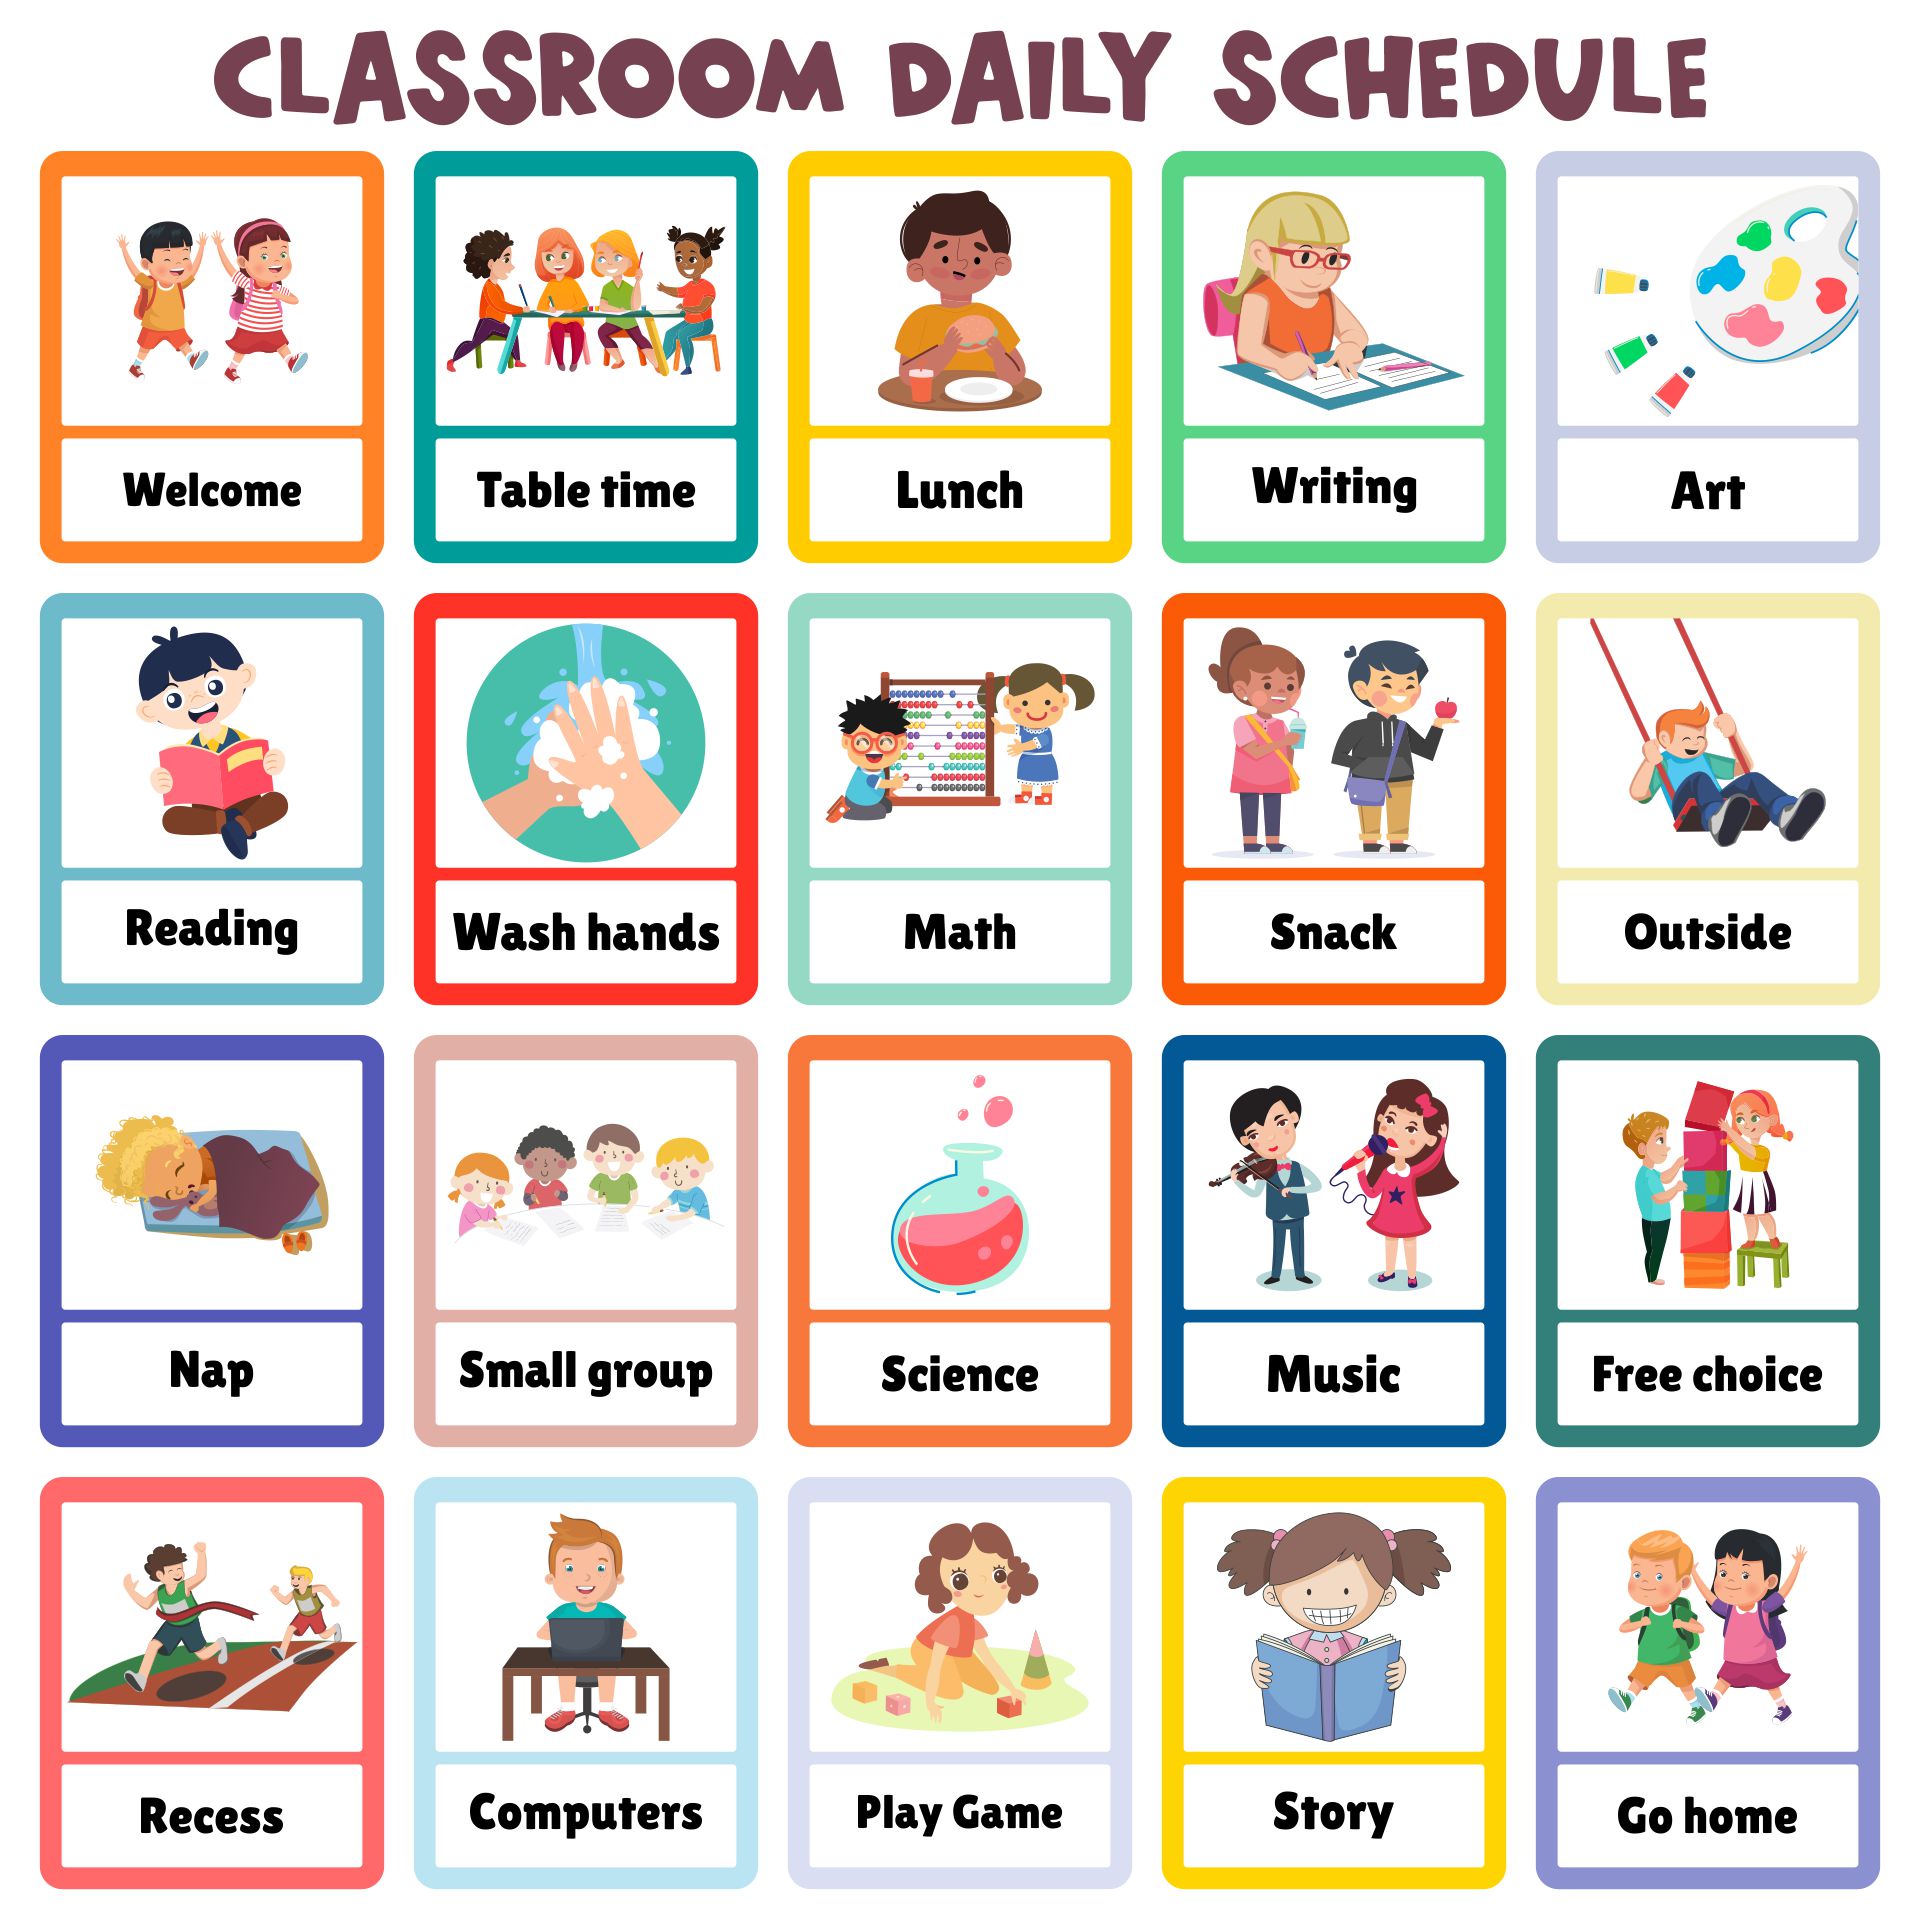 10 Best Classroom Daily Schedule Printable PDF for Free at Printablee